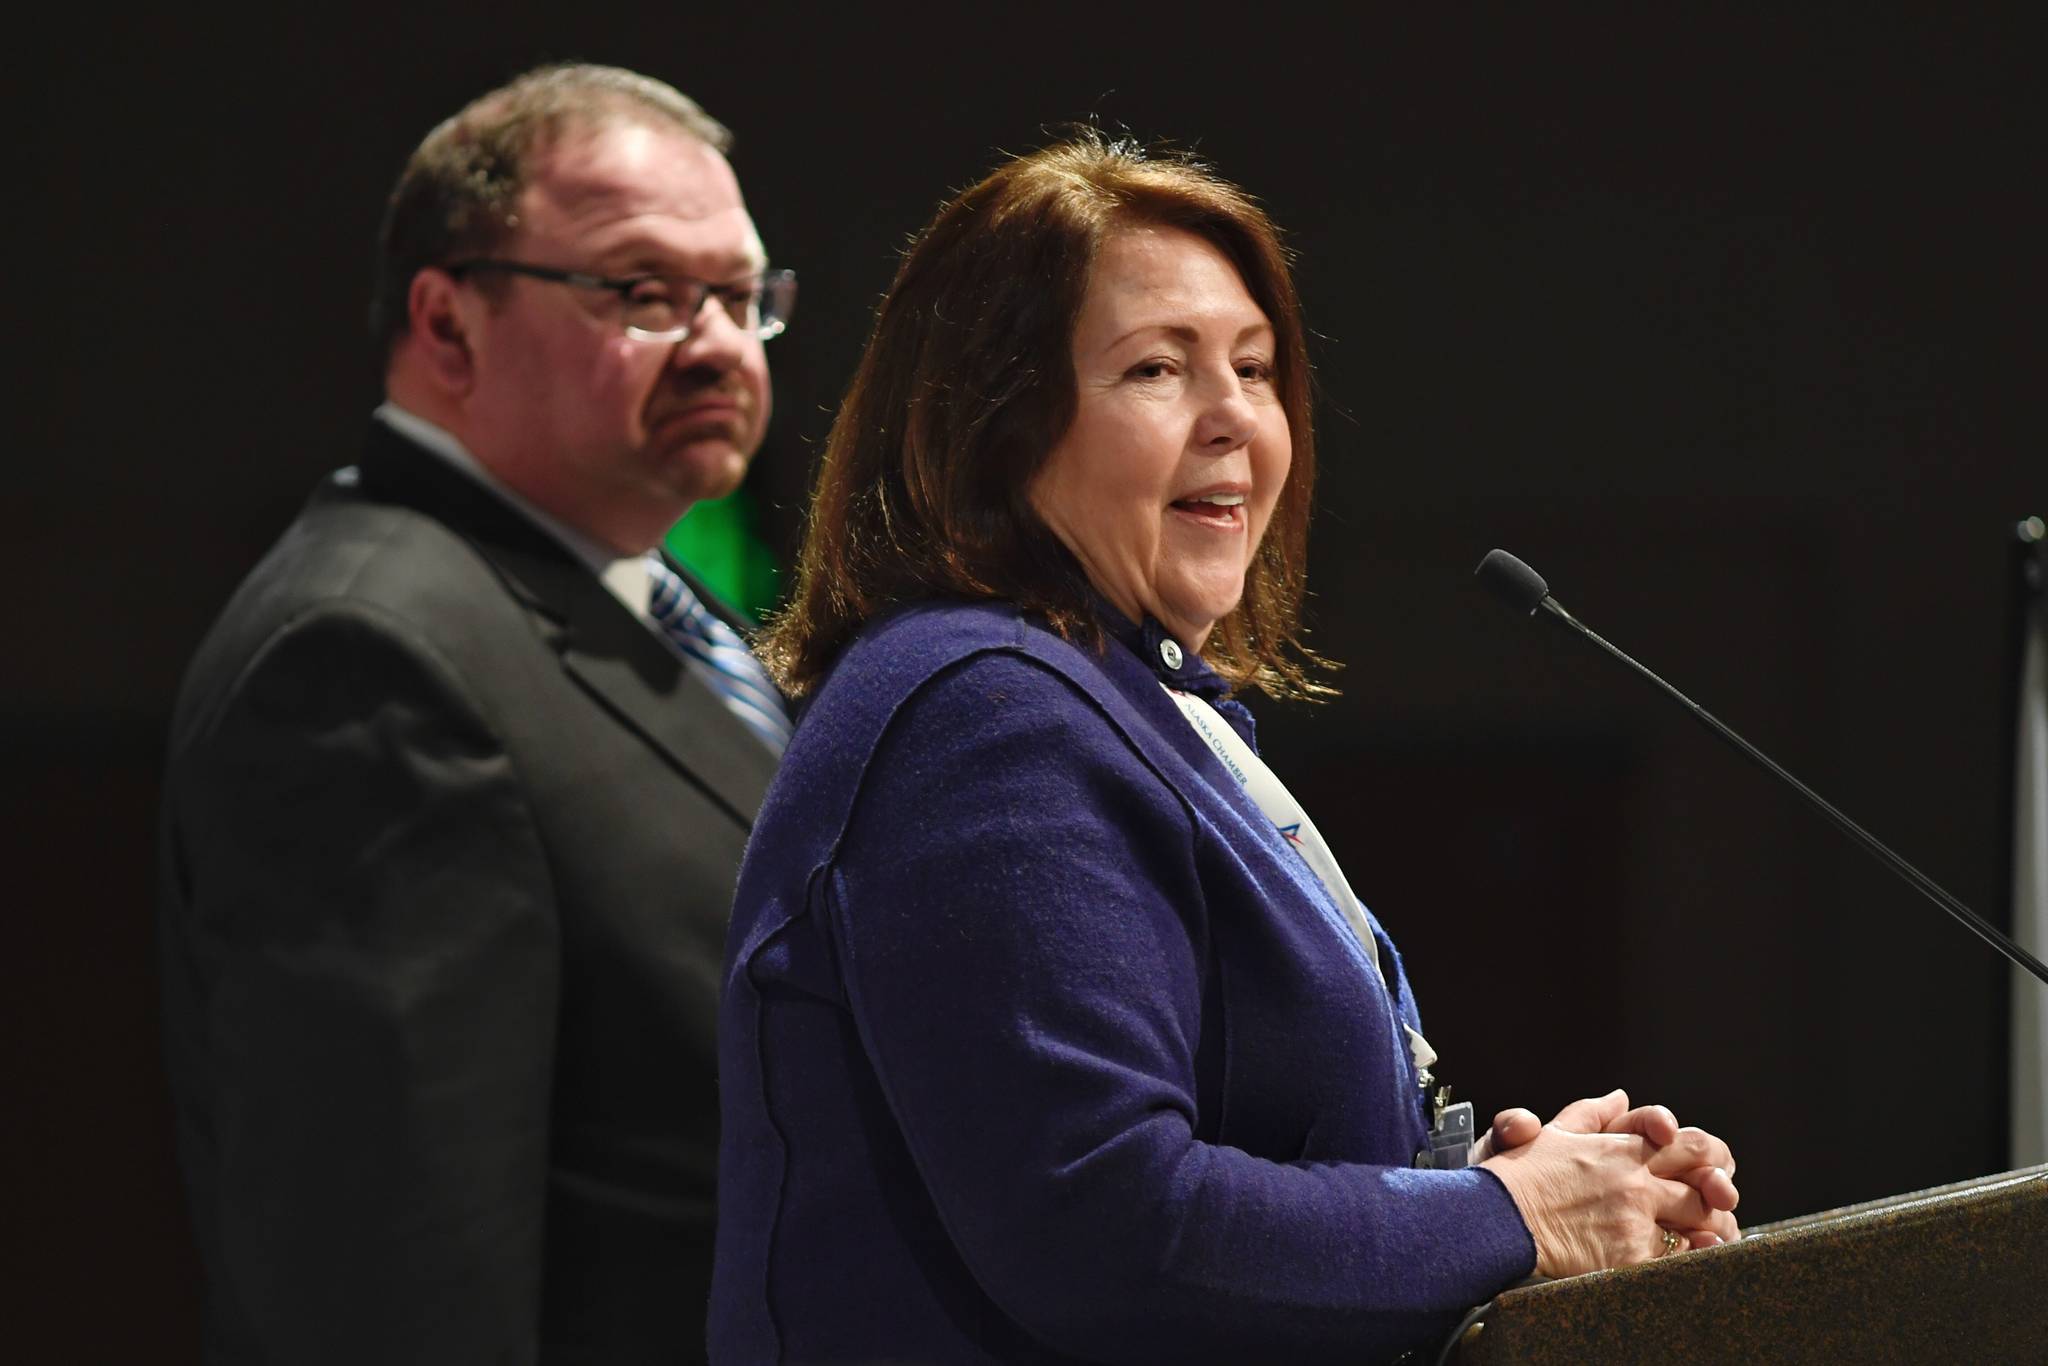 Julie Anderson, Commissioner of the Department of Commerce, Community & Economic Development, speaks to the Alaska Chamber of Commerce at Centennial Hall on Thursday, Jan. 31, 2019. With Anderson on stage Curtis Thayer, President and CEO of the Alaska Chamber. (Michael Penn | Juneau Empire)